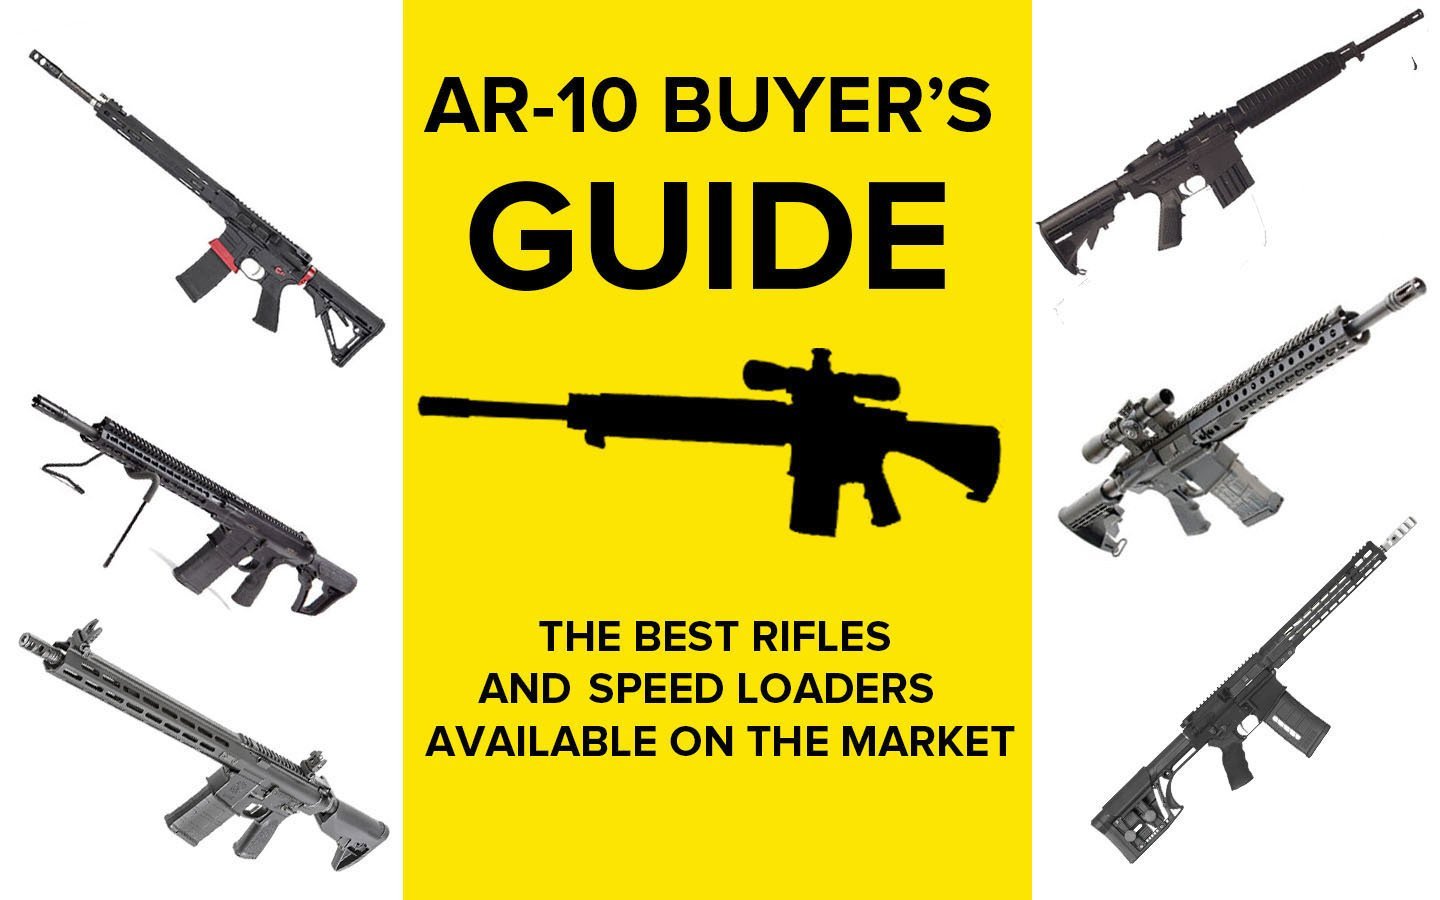 http://podavach.store/cdn/shop/articles/6-best-ar-10-rifles-on-the-market-complete-guide-in-2020-podavach-893062.jpg?v=1601905311